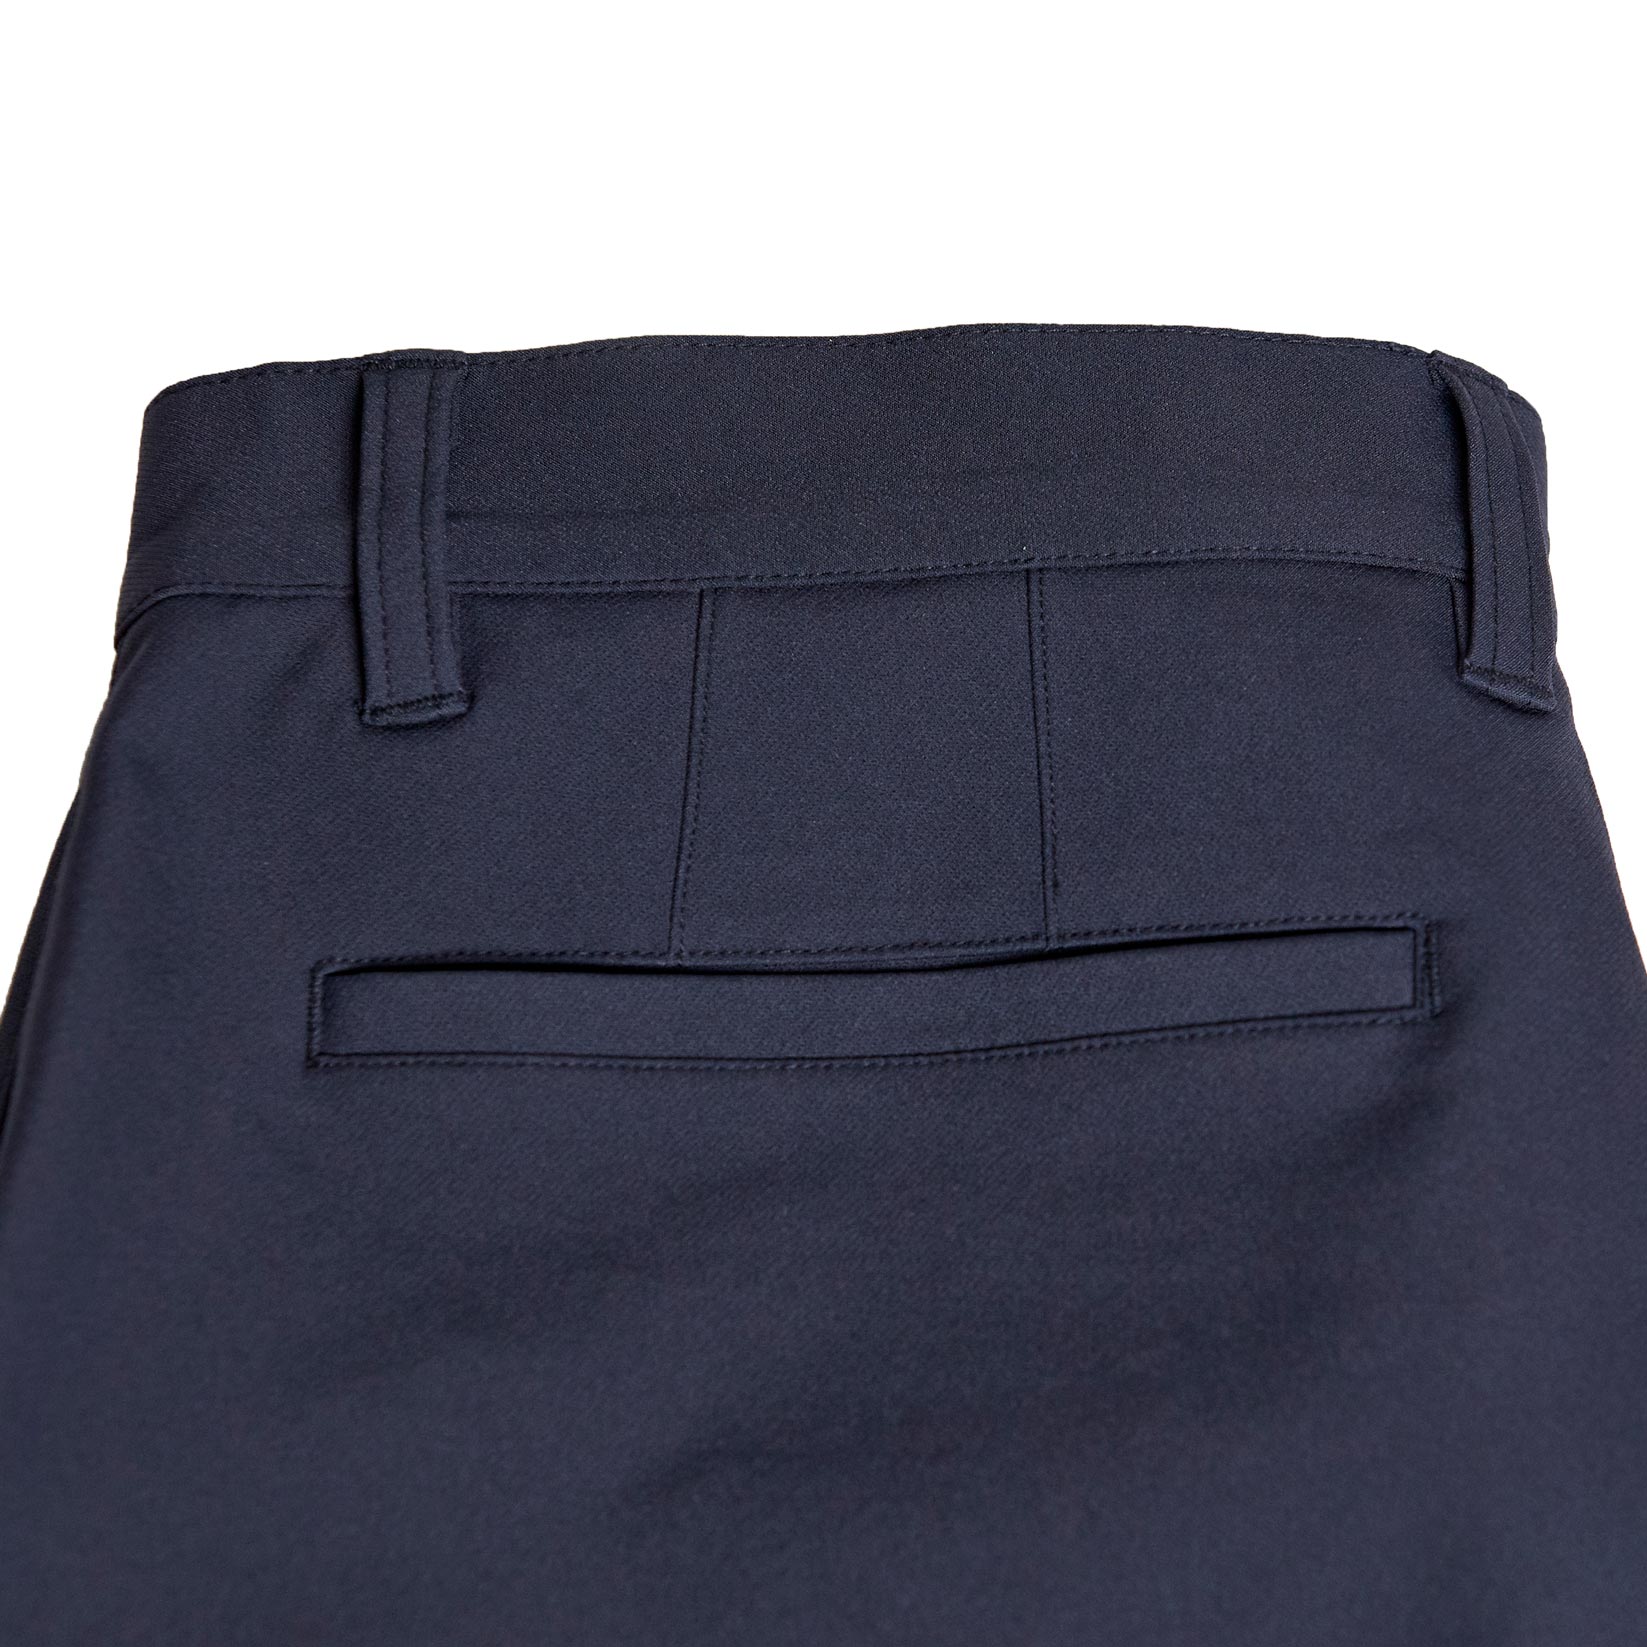 Athletic Fit Shorts - Navy - State and Liberty Clothing Company